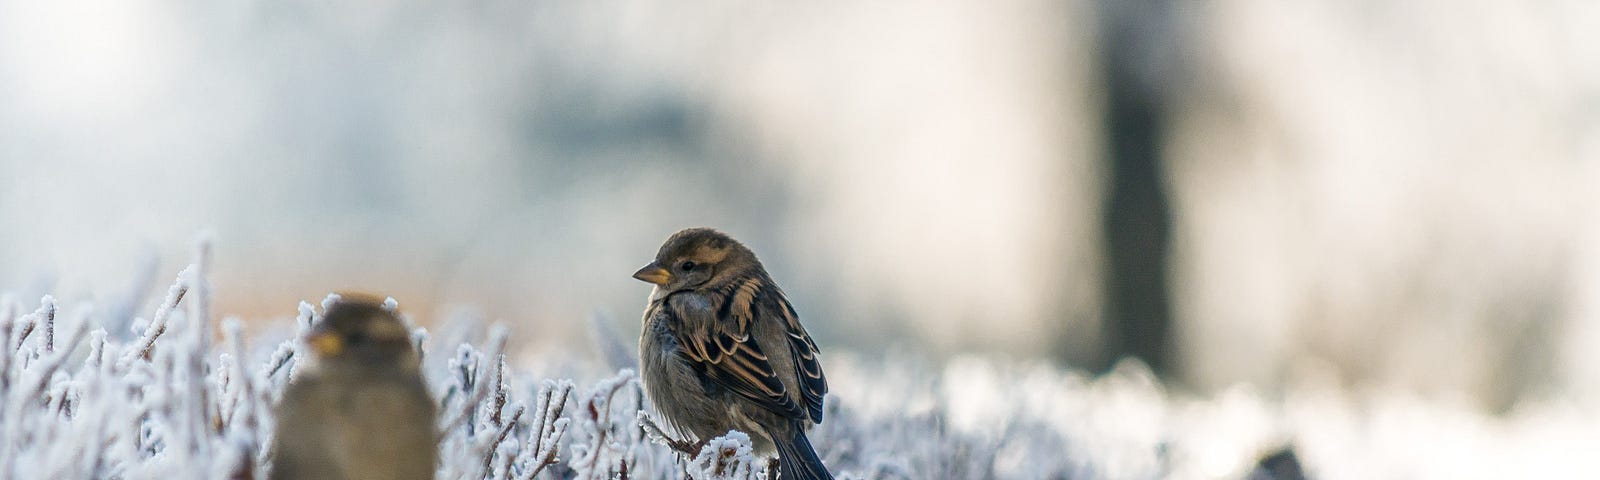 Two sparrows perched on frosted bush in winter. Sparrow in foreground blurred. Sparrow in background in focus.